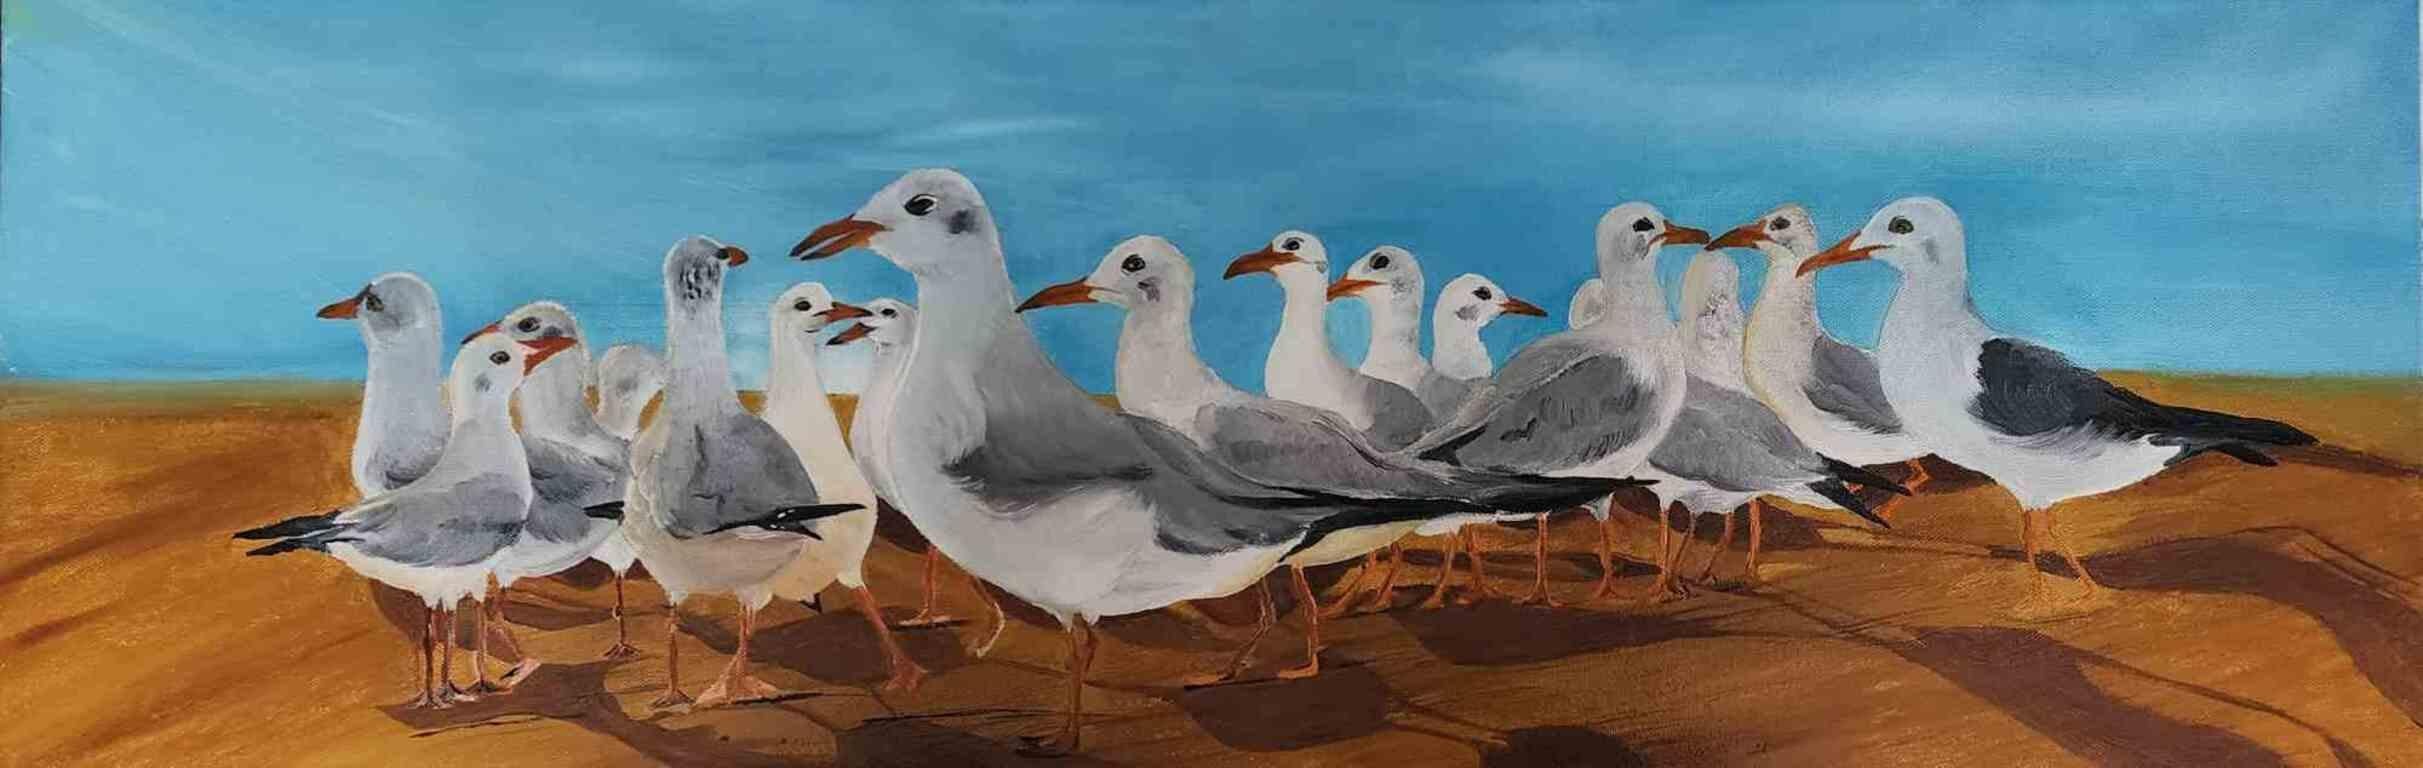 This painting is about Gulls also known as Seagulls. They belongs to the seabird family Laridae. 
Most gull species are migratory, with birds moving to warmer habitats during the winter. 
Eccellenti condition.